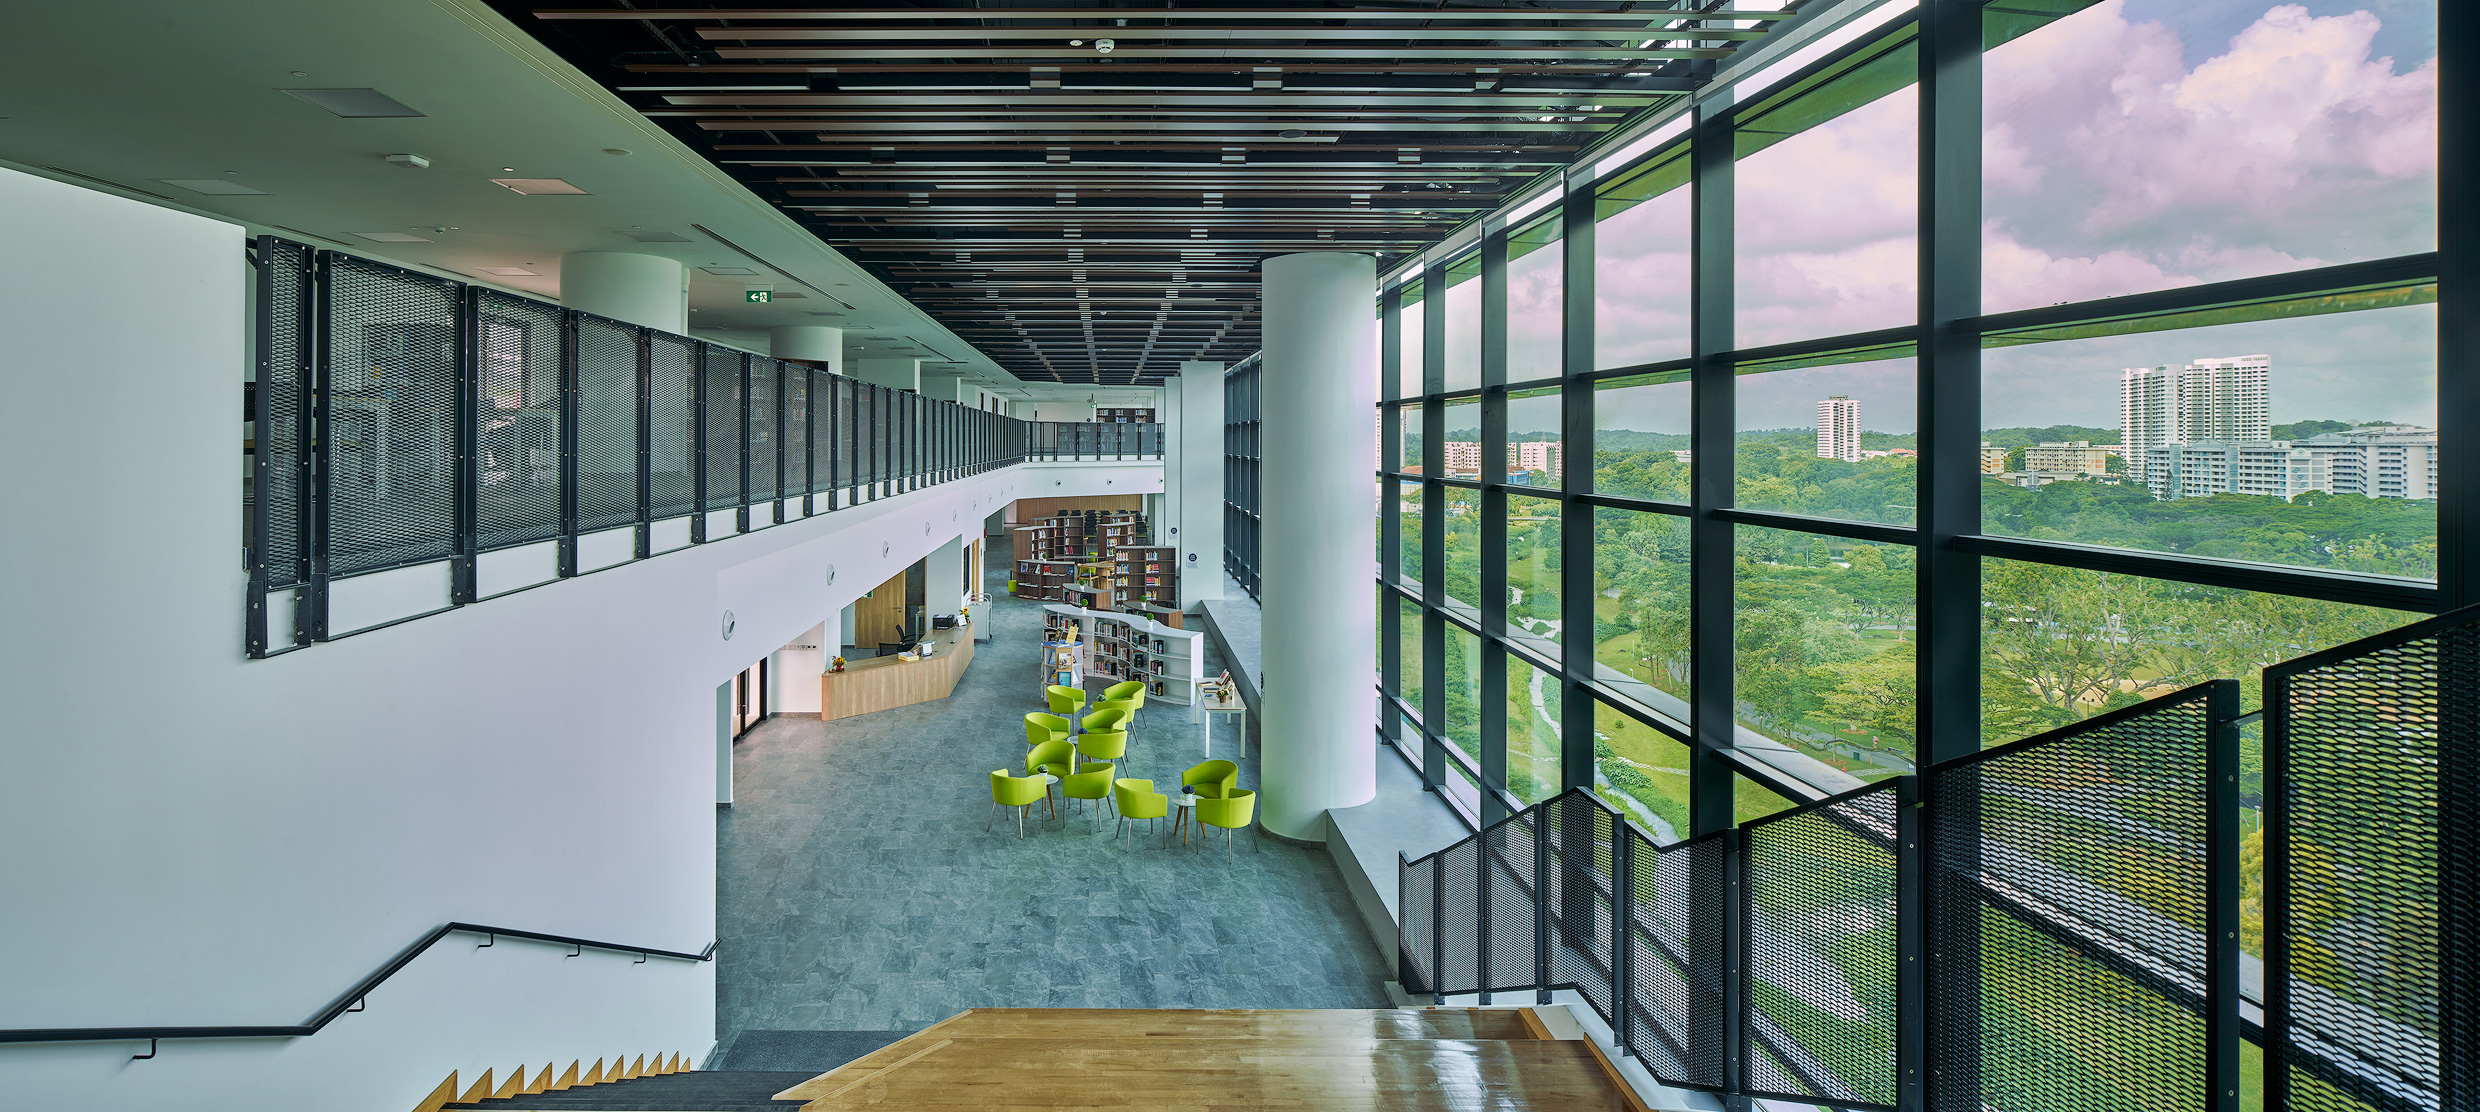 The tranquillity of EJC’s library enhanced by external landscape